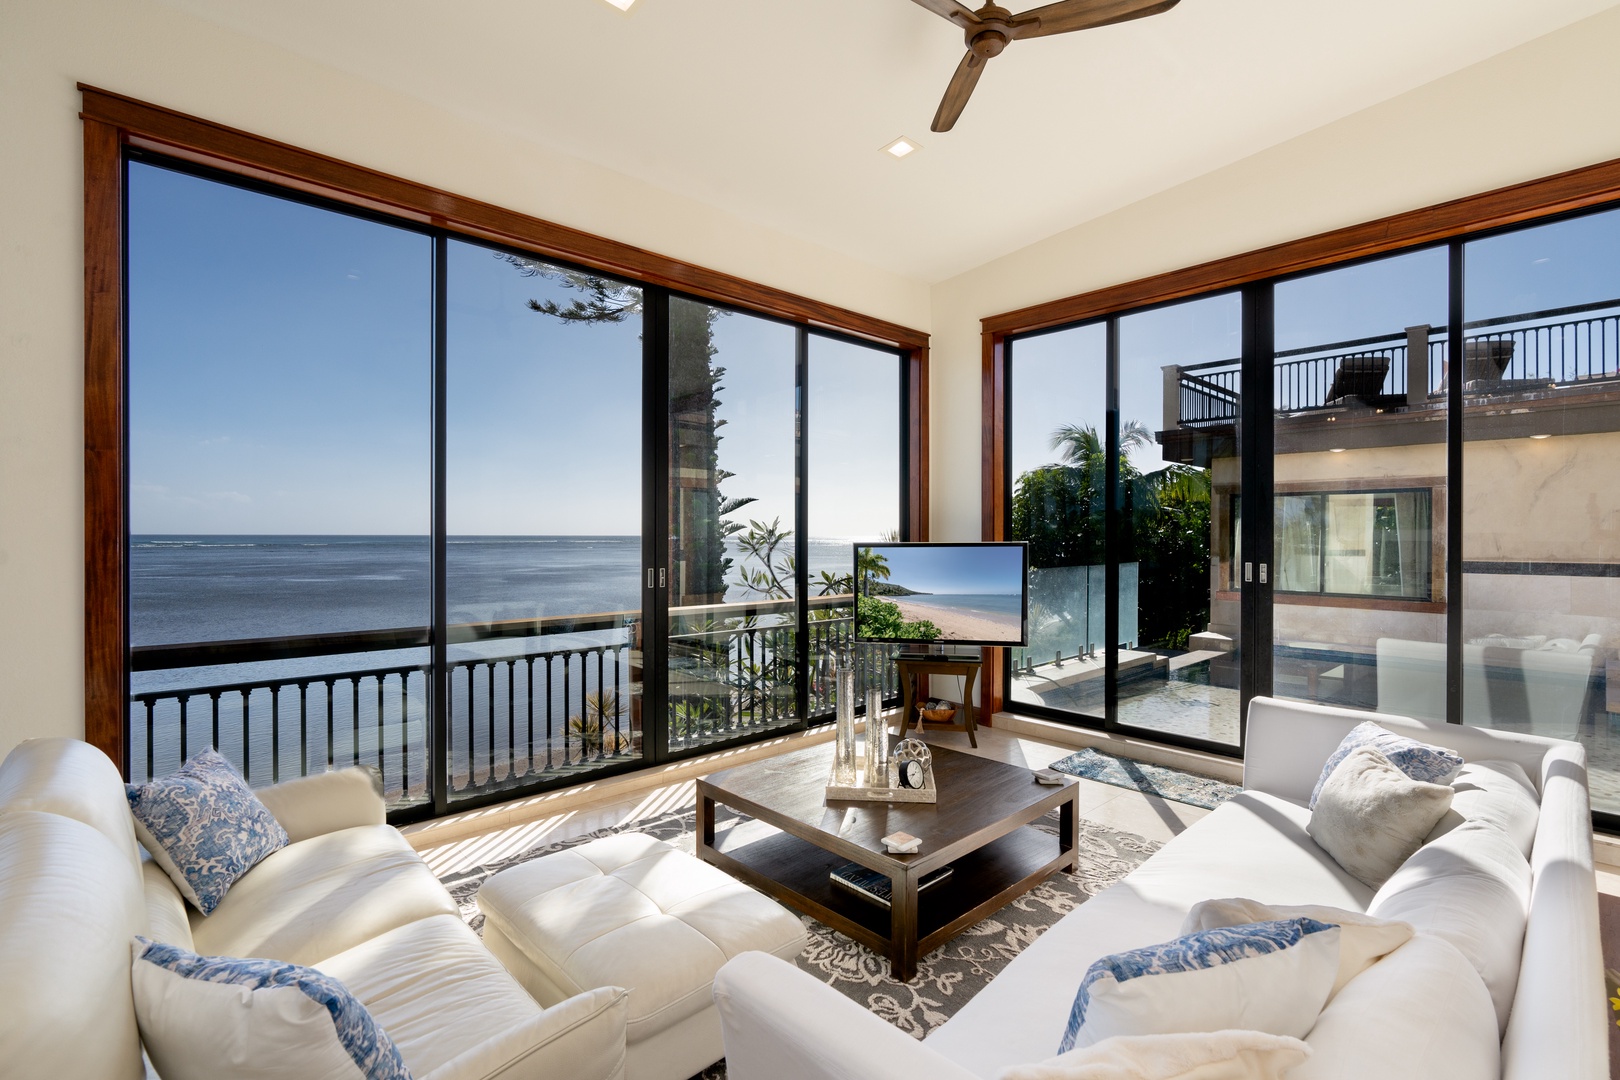 Honolulu Vacation Rentals, Wailupe Seaside - Comfortable seating with a view for relaxing with friends and family.